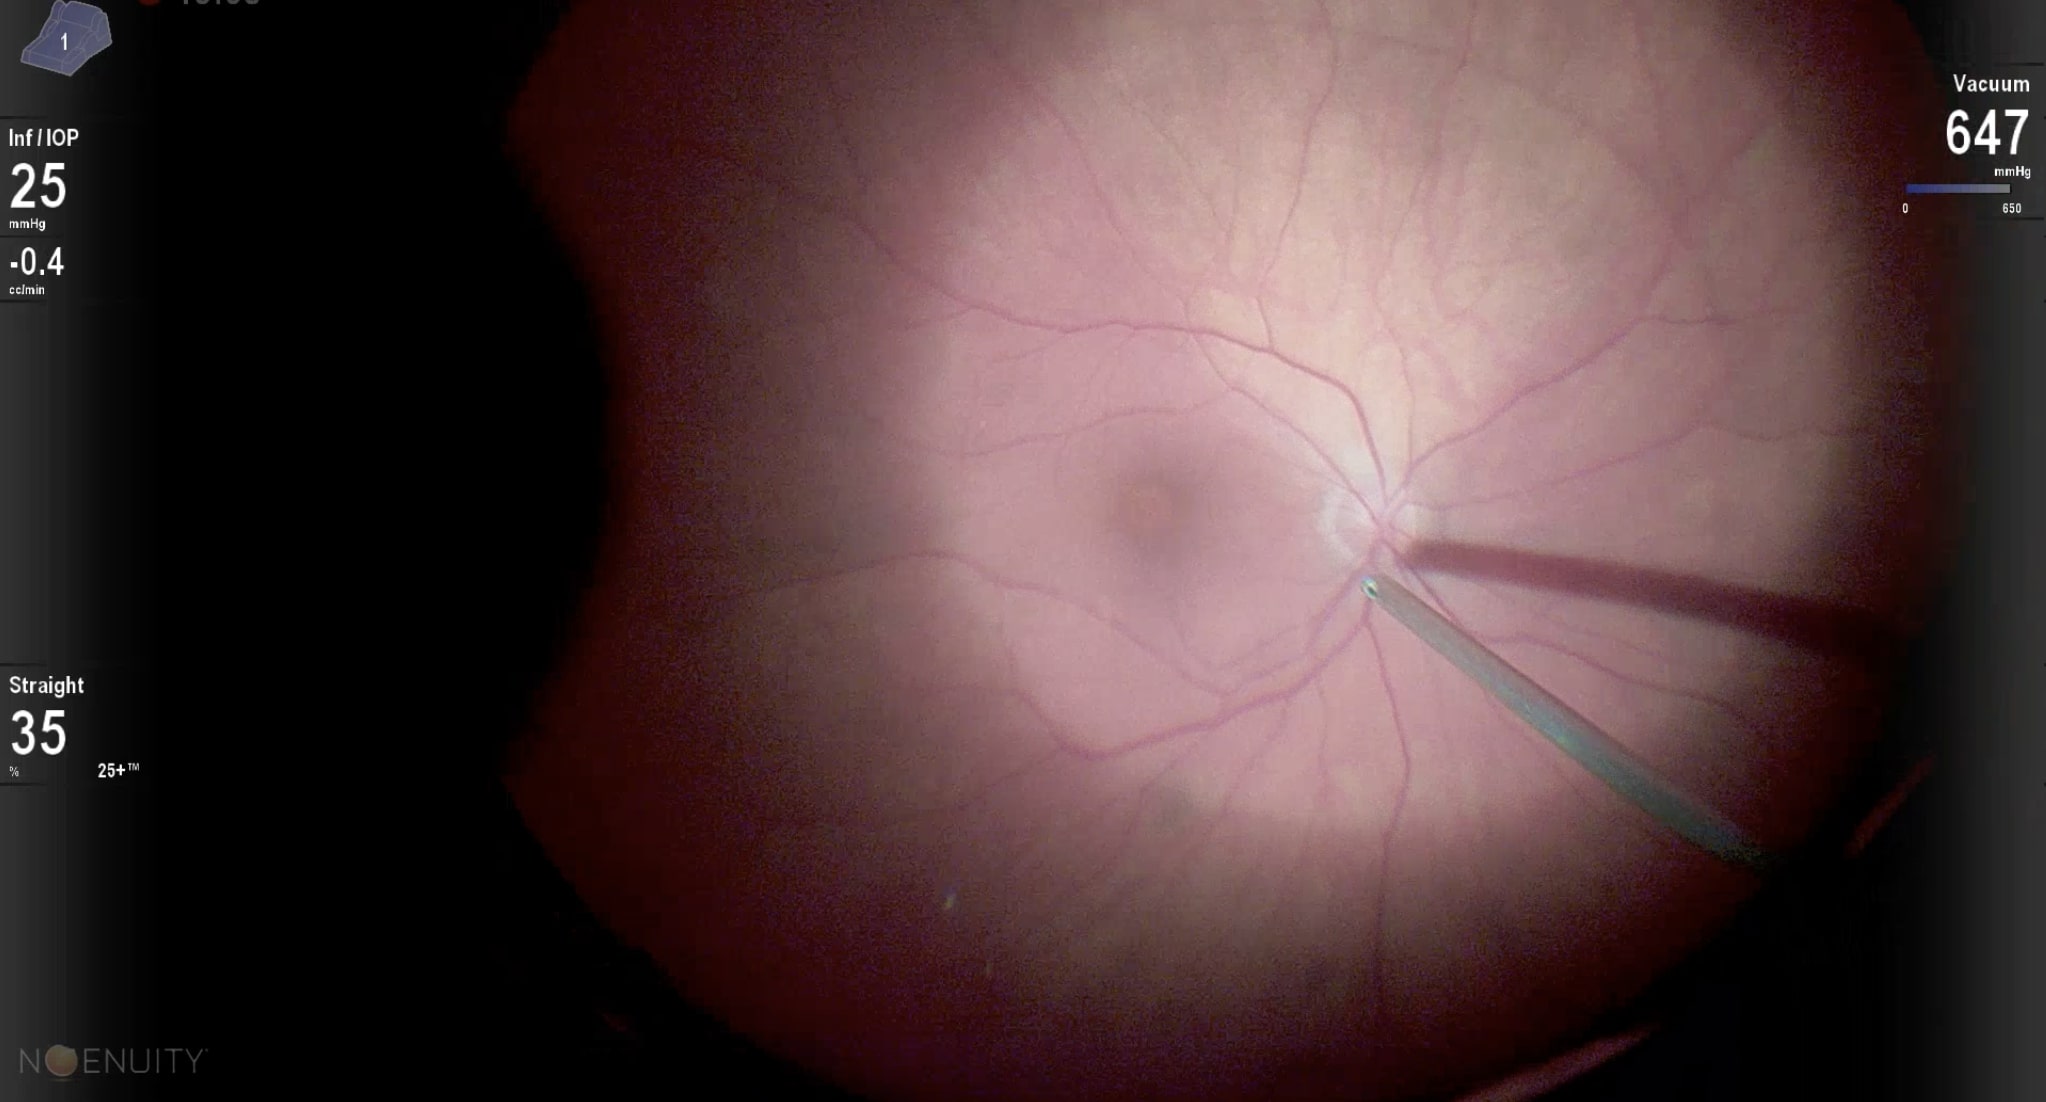 Figure 4.1 PVD Induction with the Cutter at the Optic Disc